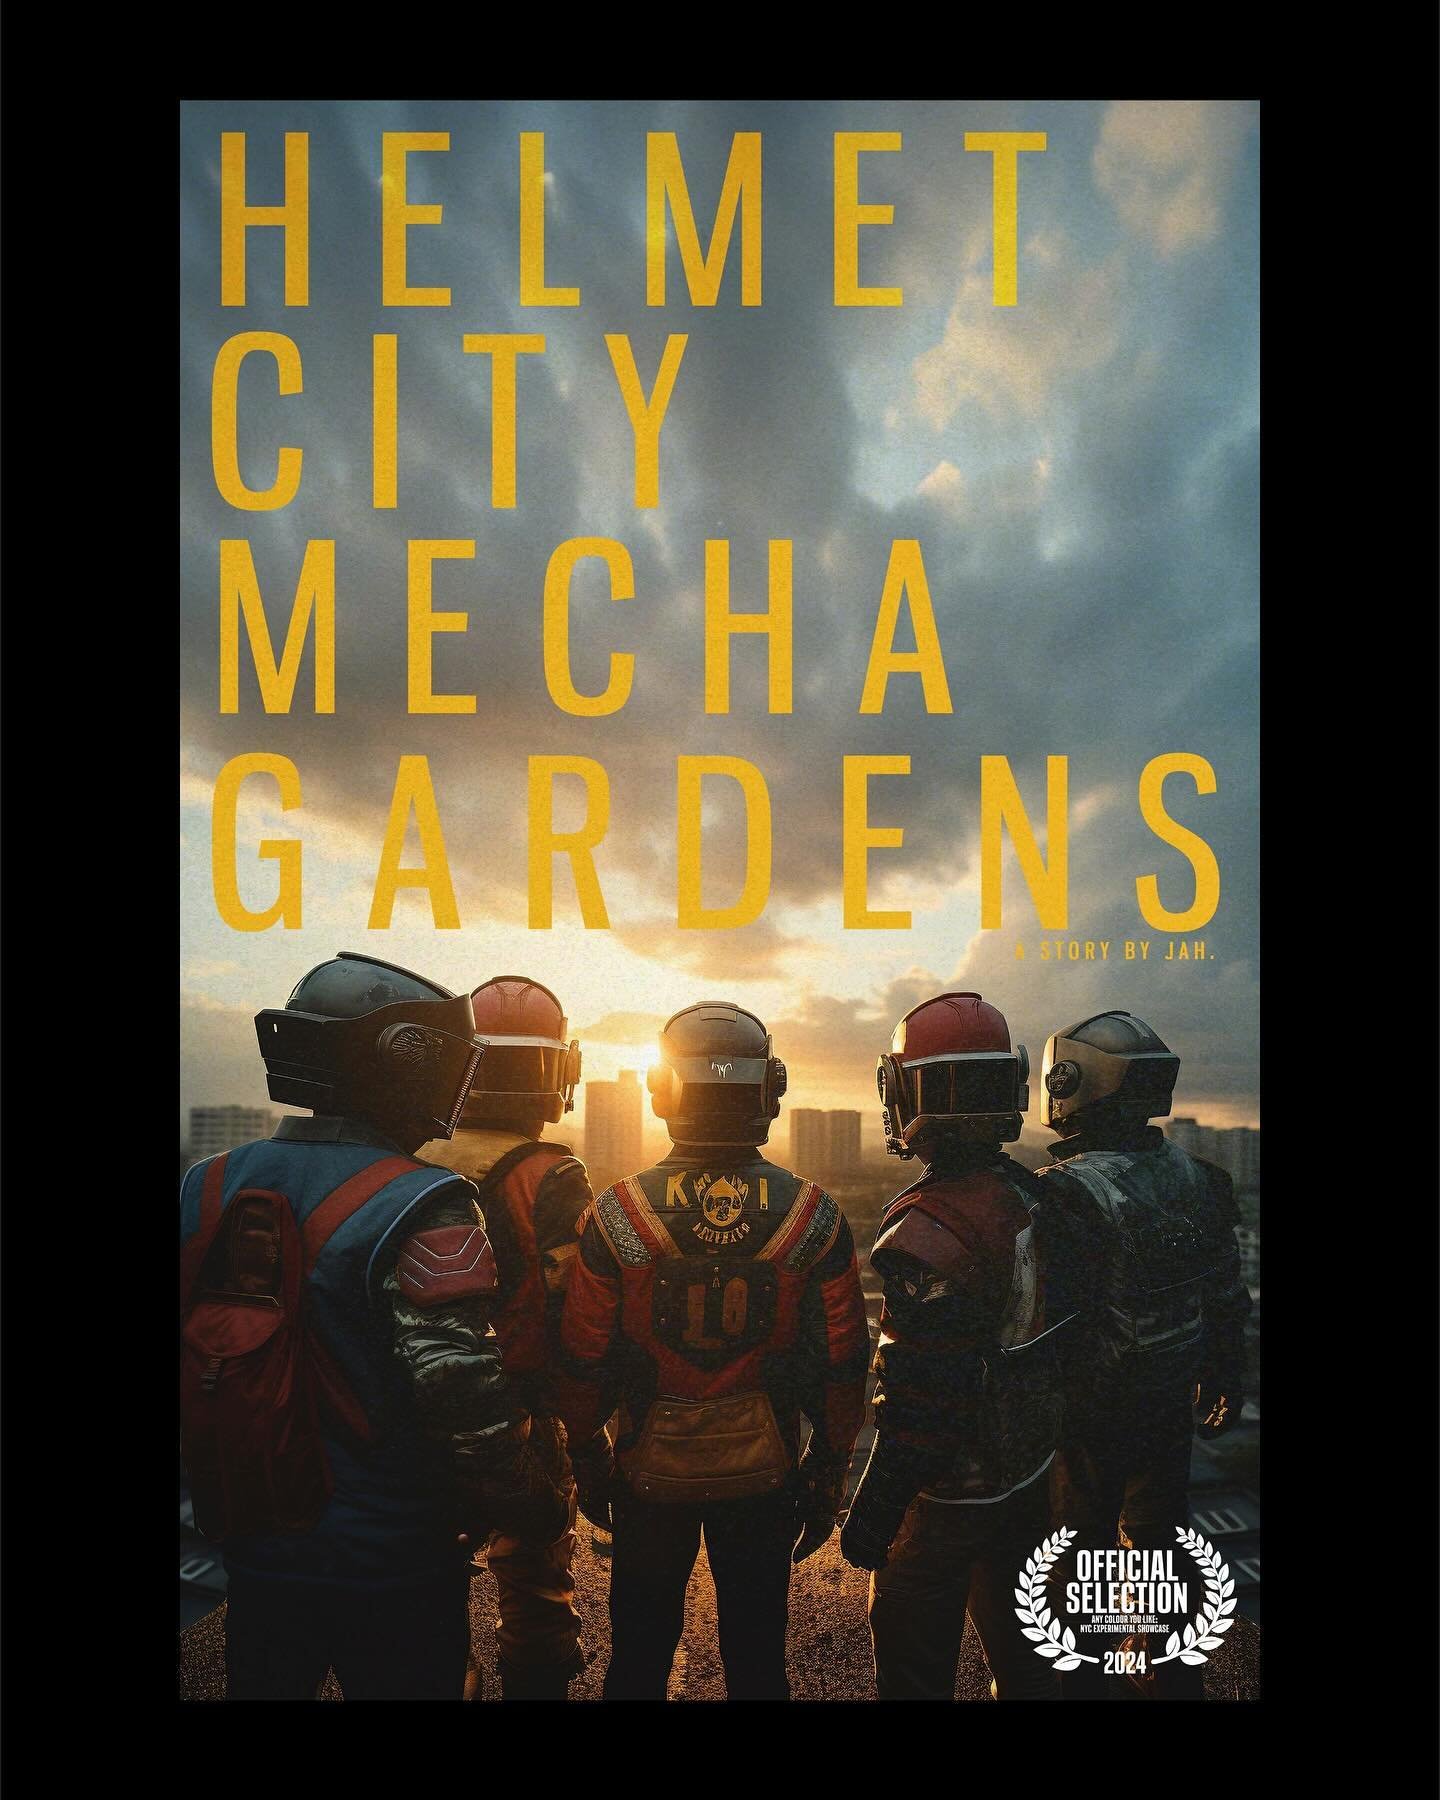 My short Film Helmet City:Mecha Gardens has been Officially selected for #acylstudio NYC Experimental Showcase!

This film has been a labor of love and the blessings keep on coming, thank you! 

Shout out to @callmelatasha @uknomunroe and @segnontv f